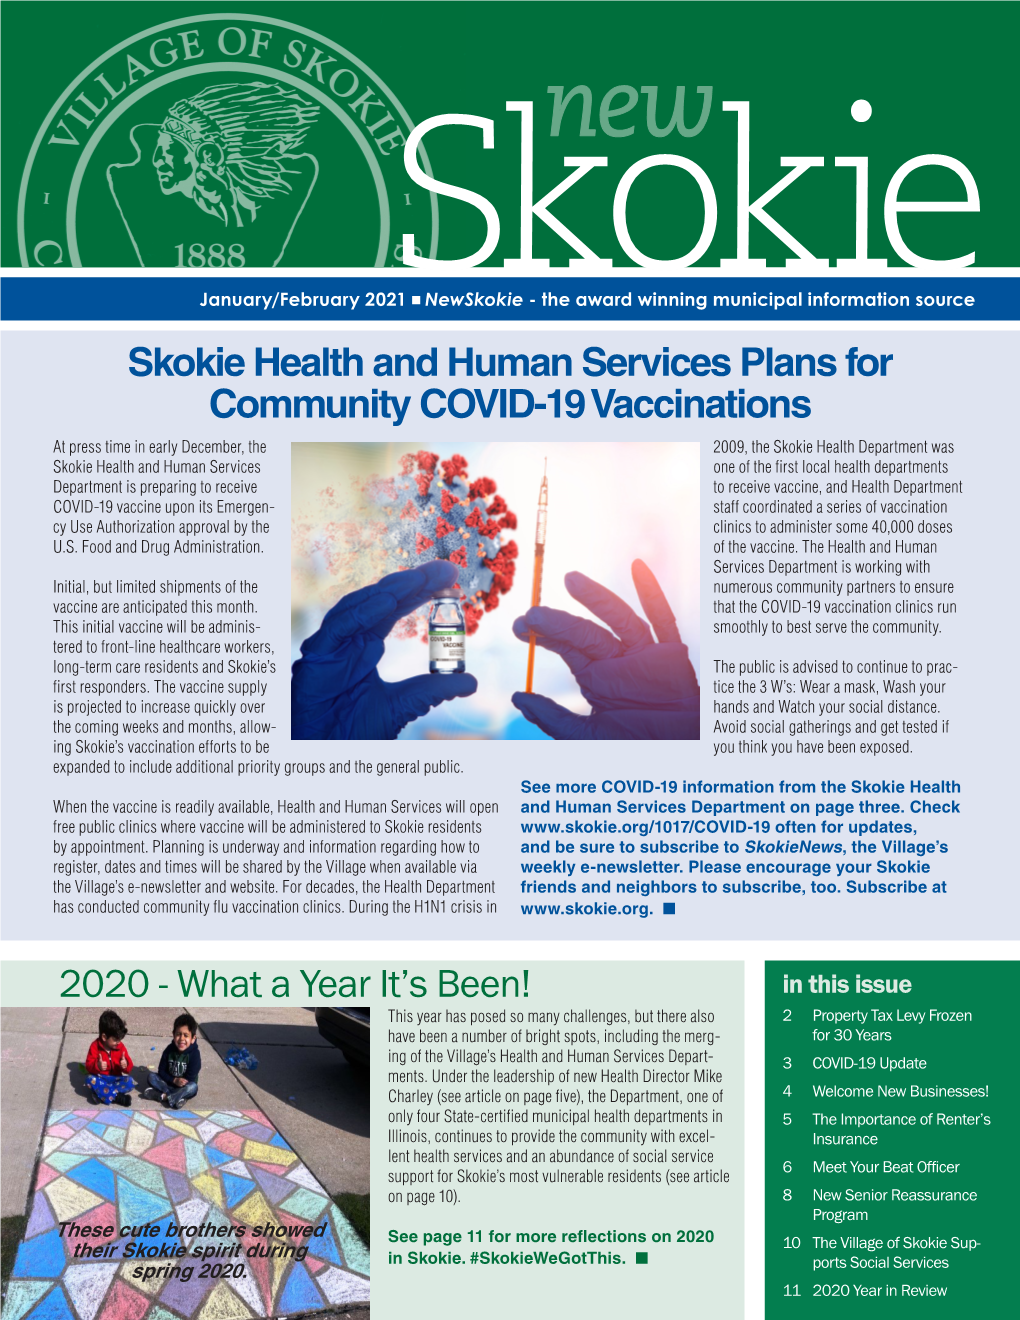 See the January/February 2021 Edition Of